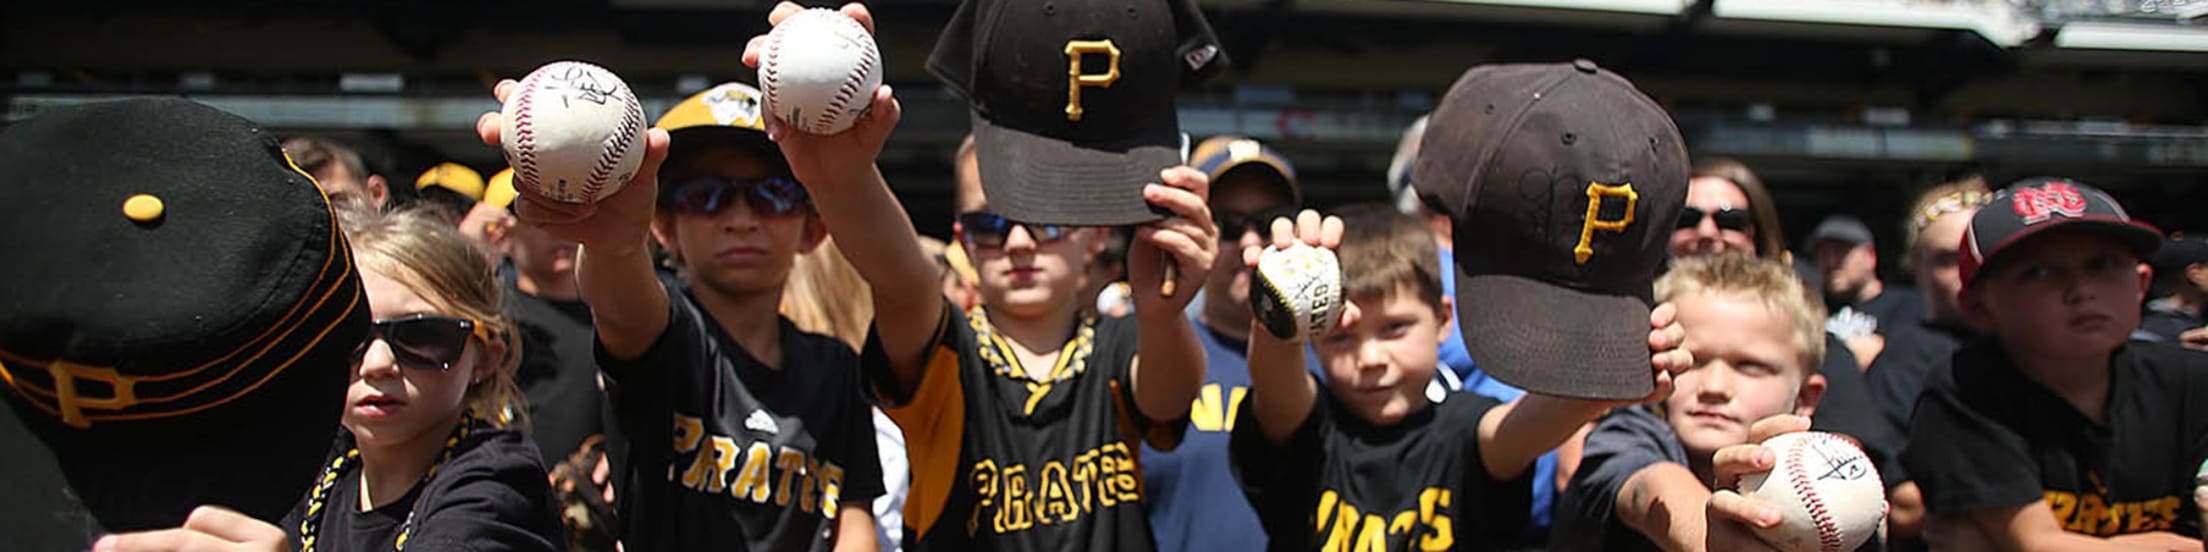 Buy Pirates Group Tickets